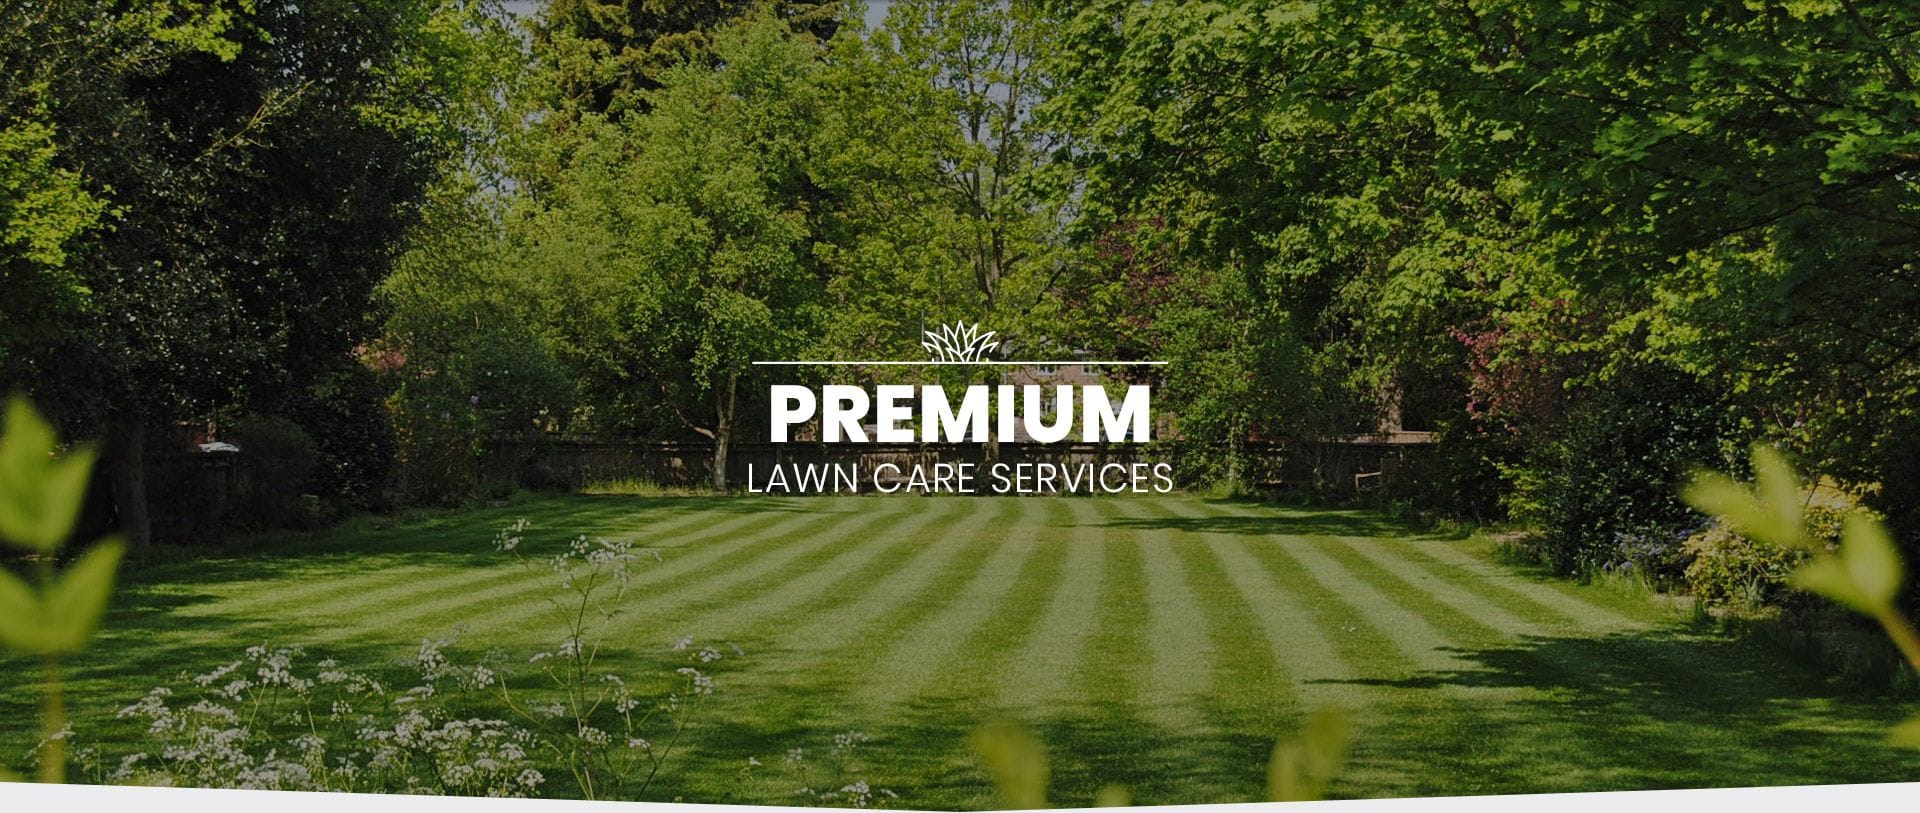 Taylor's Lawn Care | Premium Lawn Care Services Geelong, Bellarine, Curlewis, Drysdale